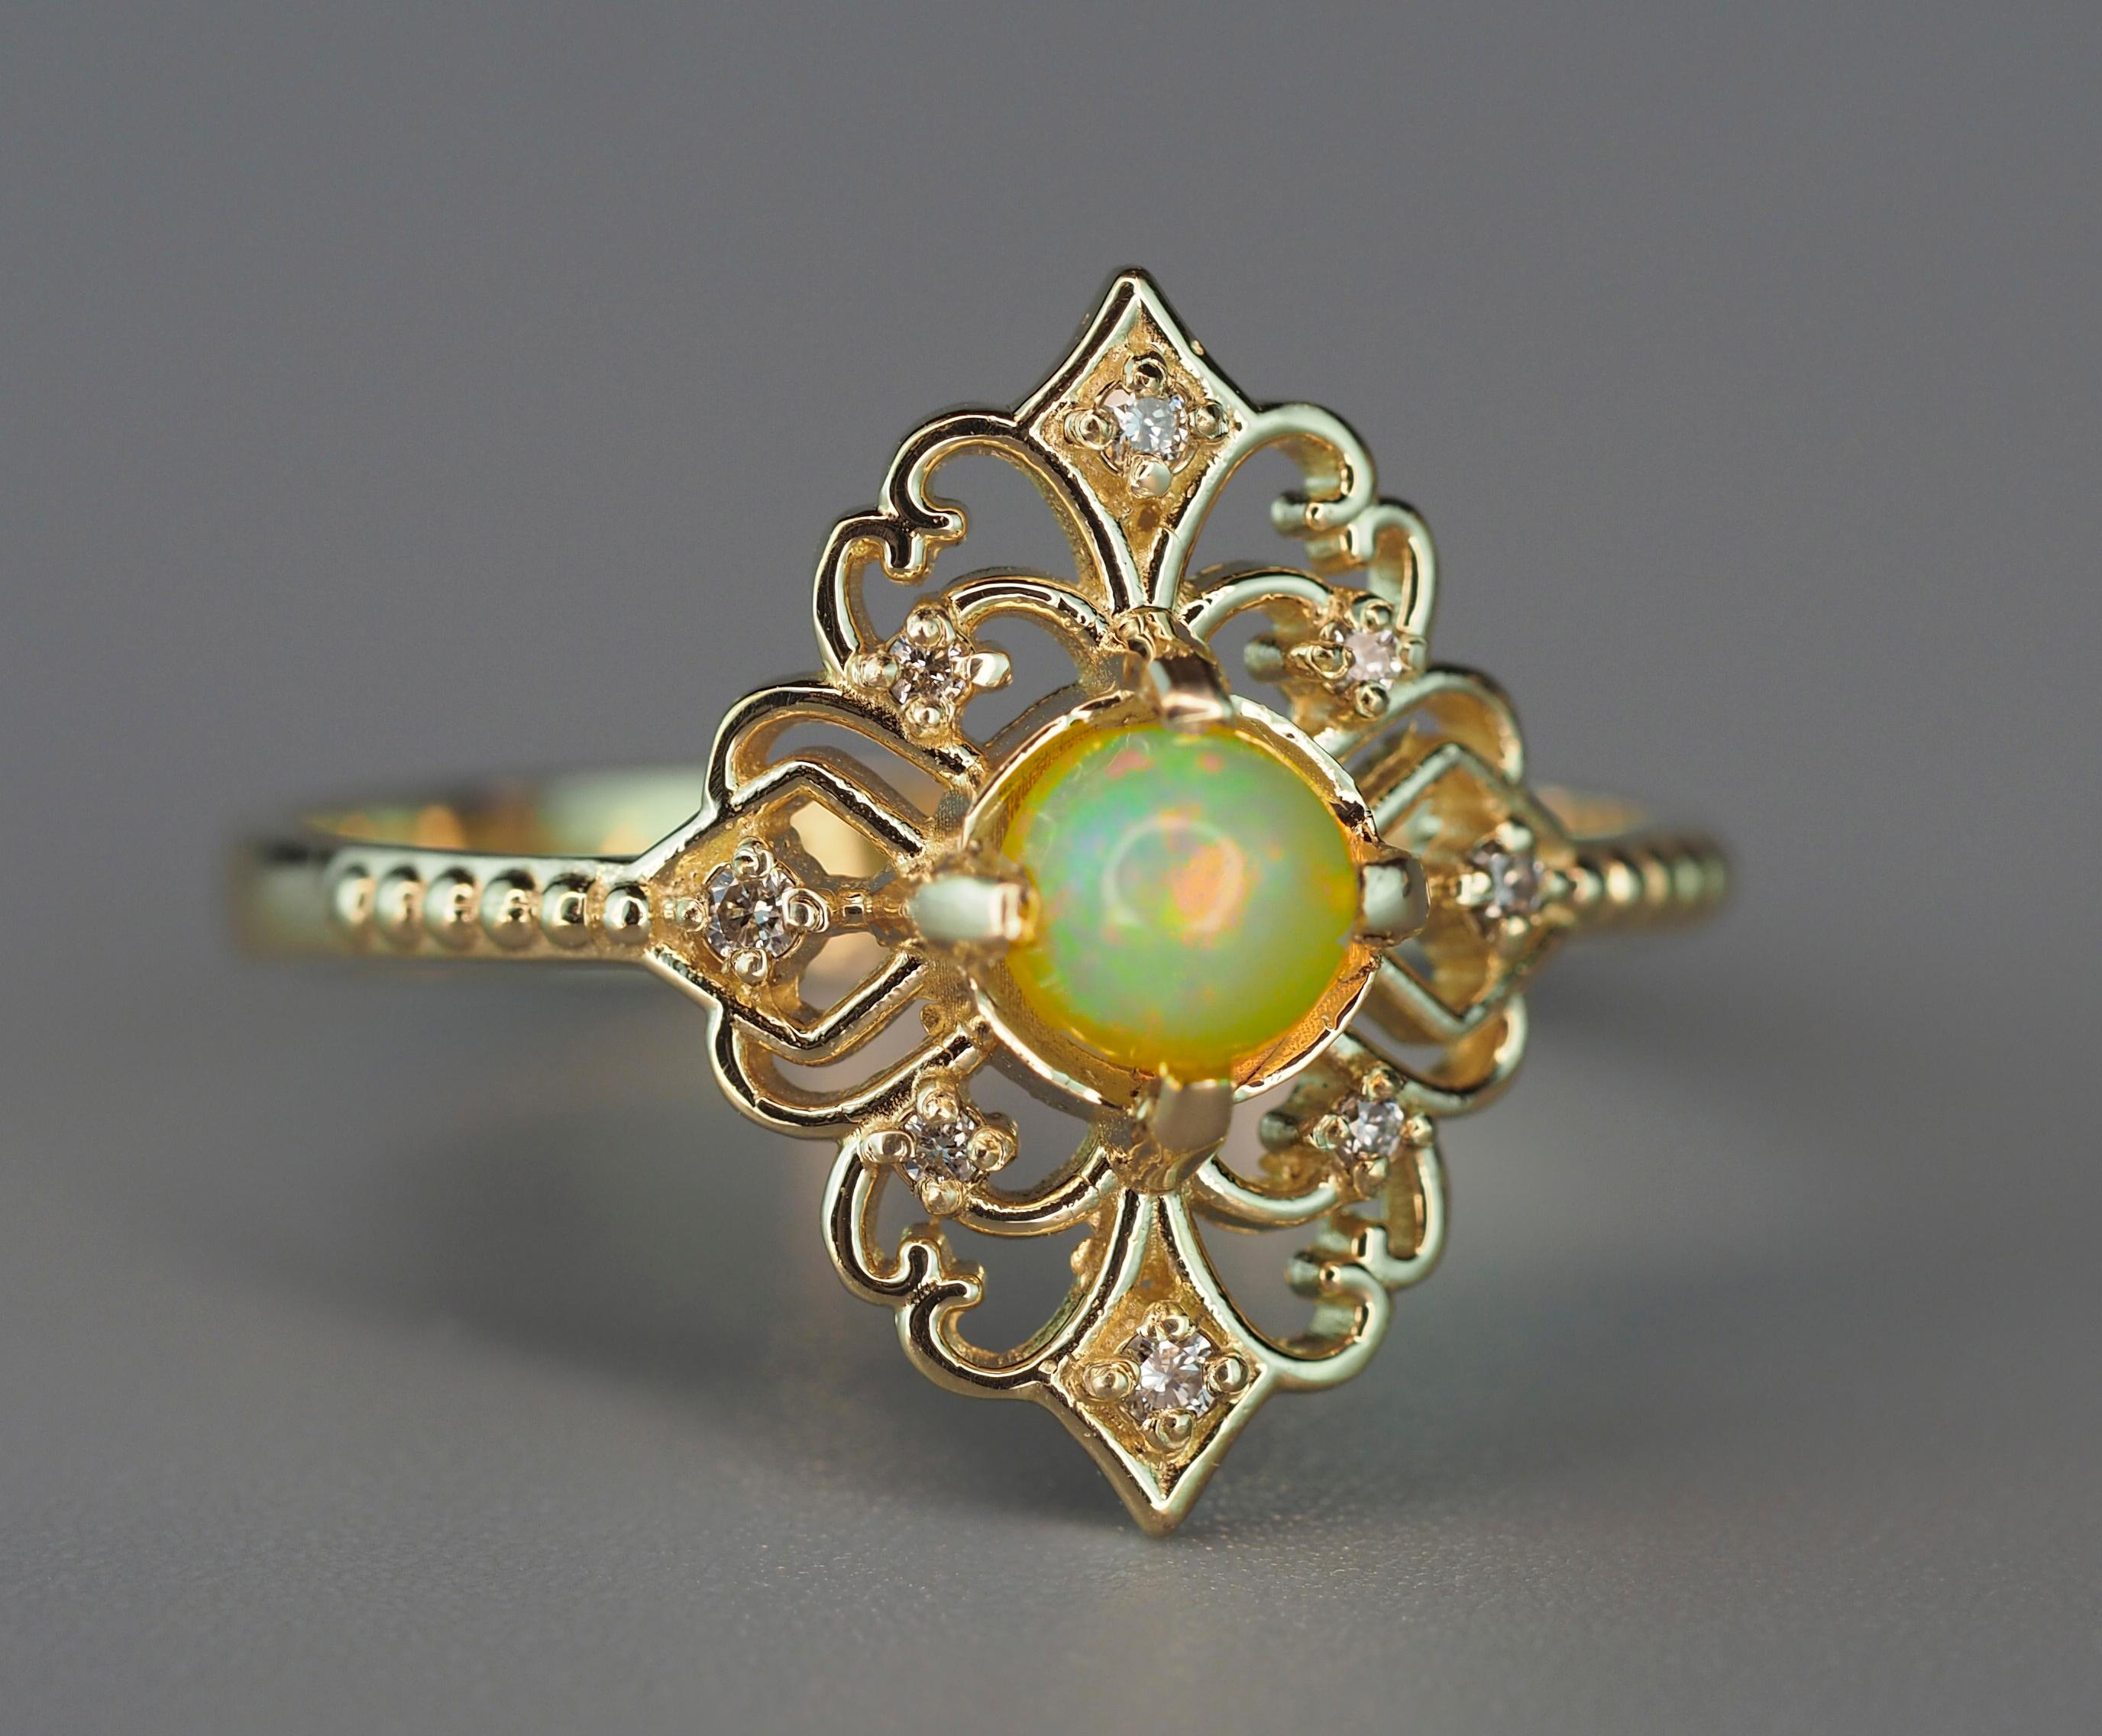 Opal 14k gold Ring. 
Round cabochon opal ring. Genuine opal ring. Vintage style ring with opal. Dainty opal ring. Art-deco opal ring.

Metal: 14k gold
Weight: 1.9 g. depends from size

Set with opal, color - yellow with play of colors
Round cut,